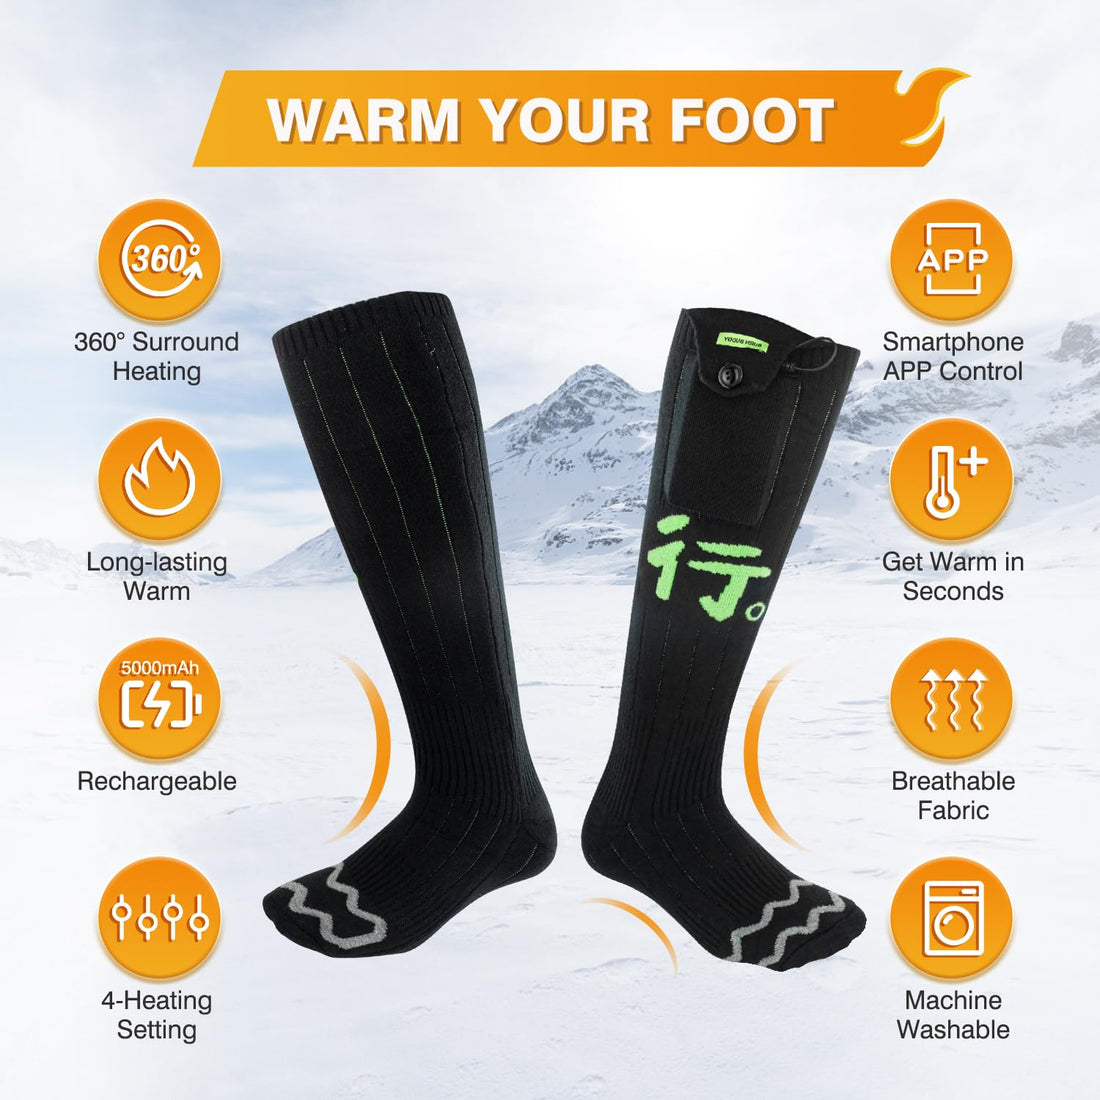 Heated Socks, Electric Socks with App Control, 5000mAh Rechargeable Heated Socks for Men, Washable Heated Socks Women, Foot Warmer for Winter Camping Hunting Outdoors Heating Socks Warm Socks -L